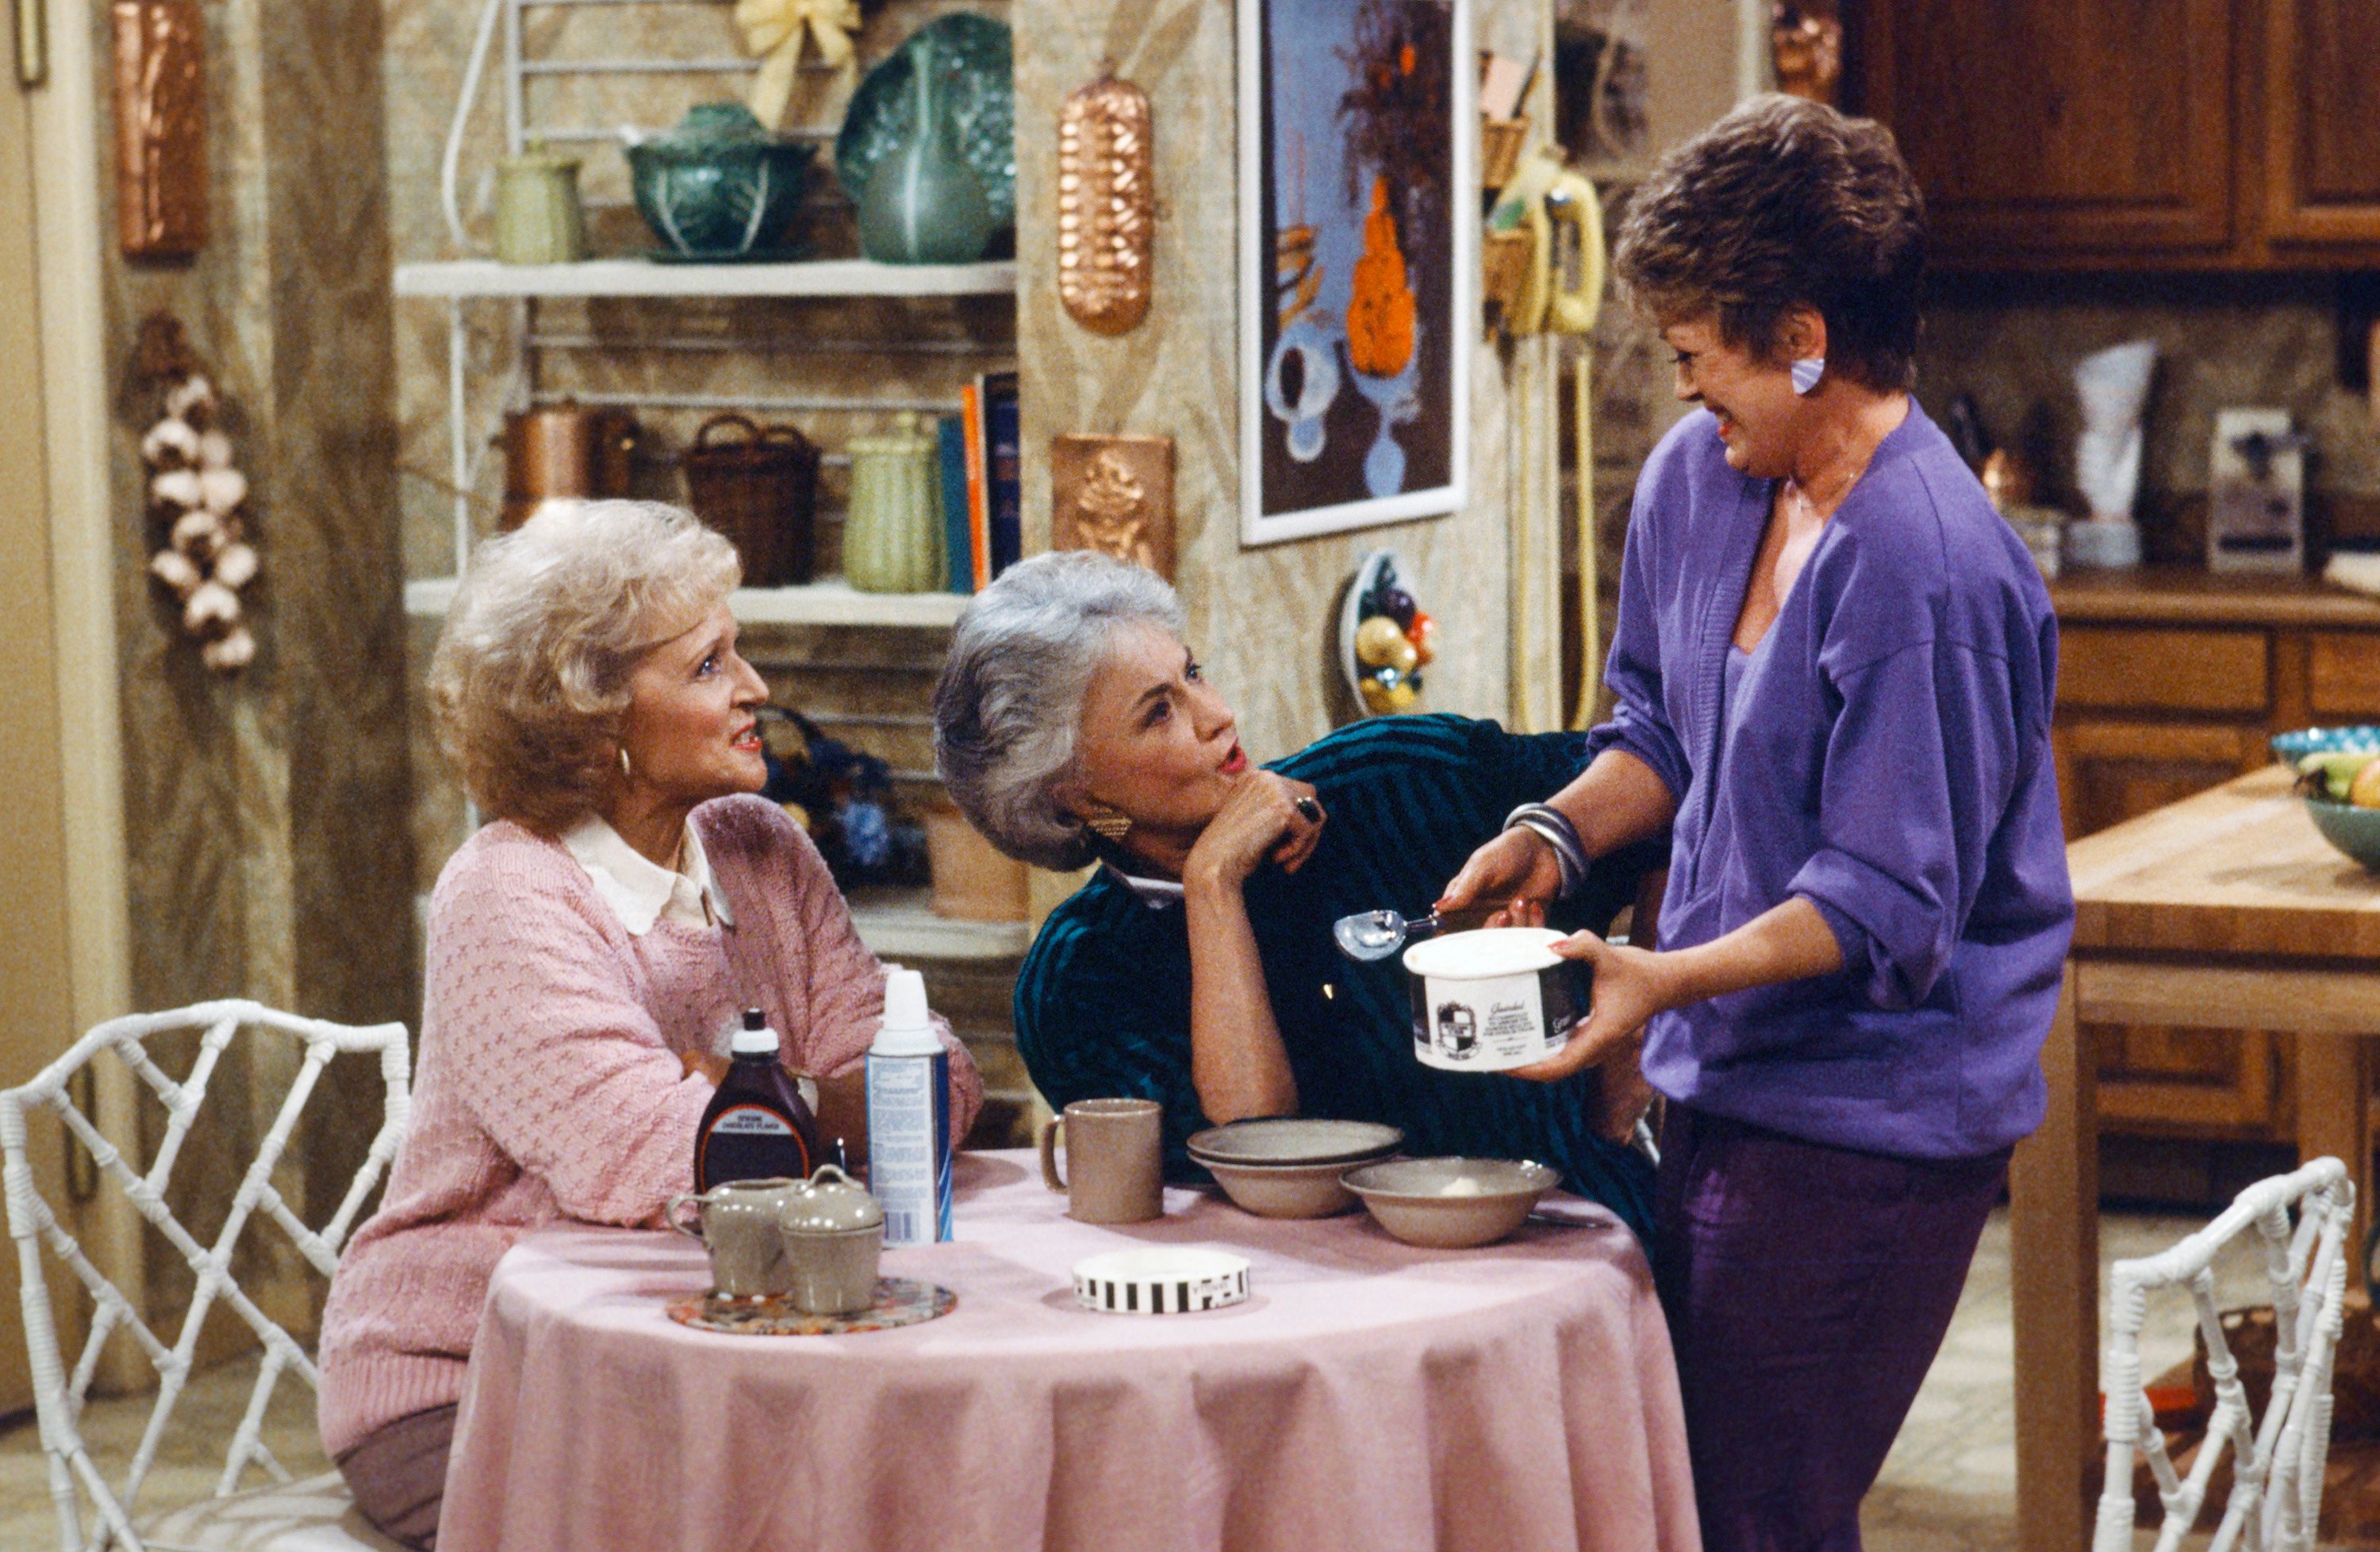 When Is the ‘Golden Girls’ Cruise, and How Much Do Tickets Cost?